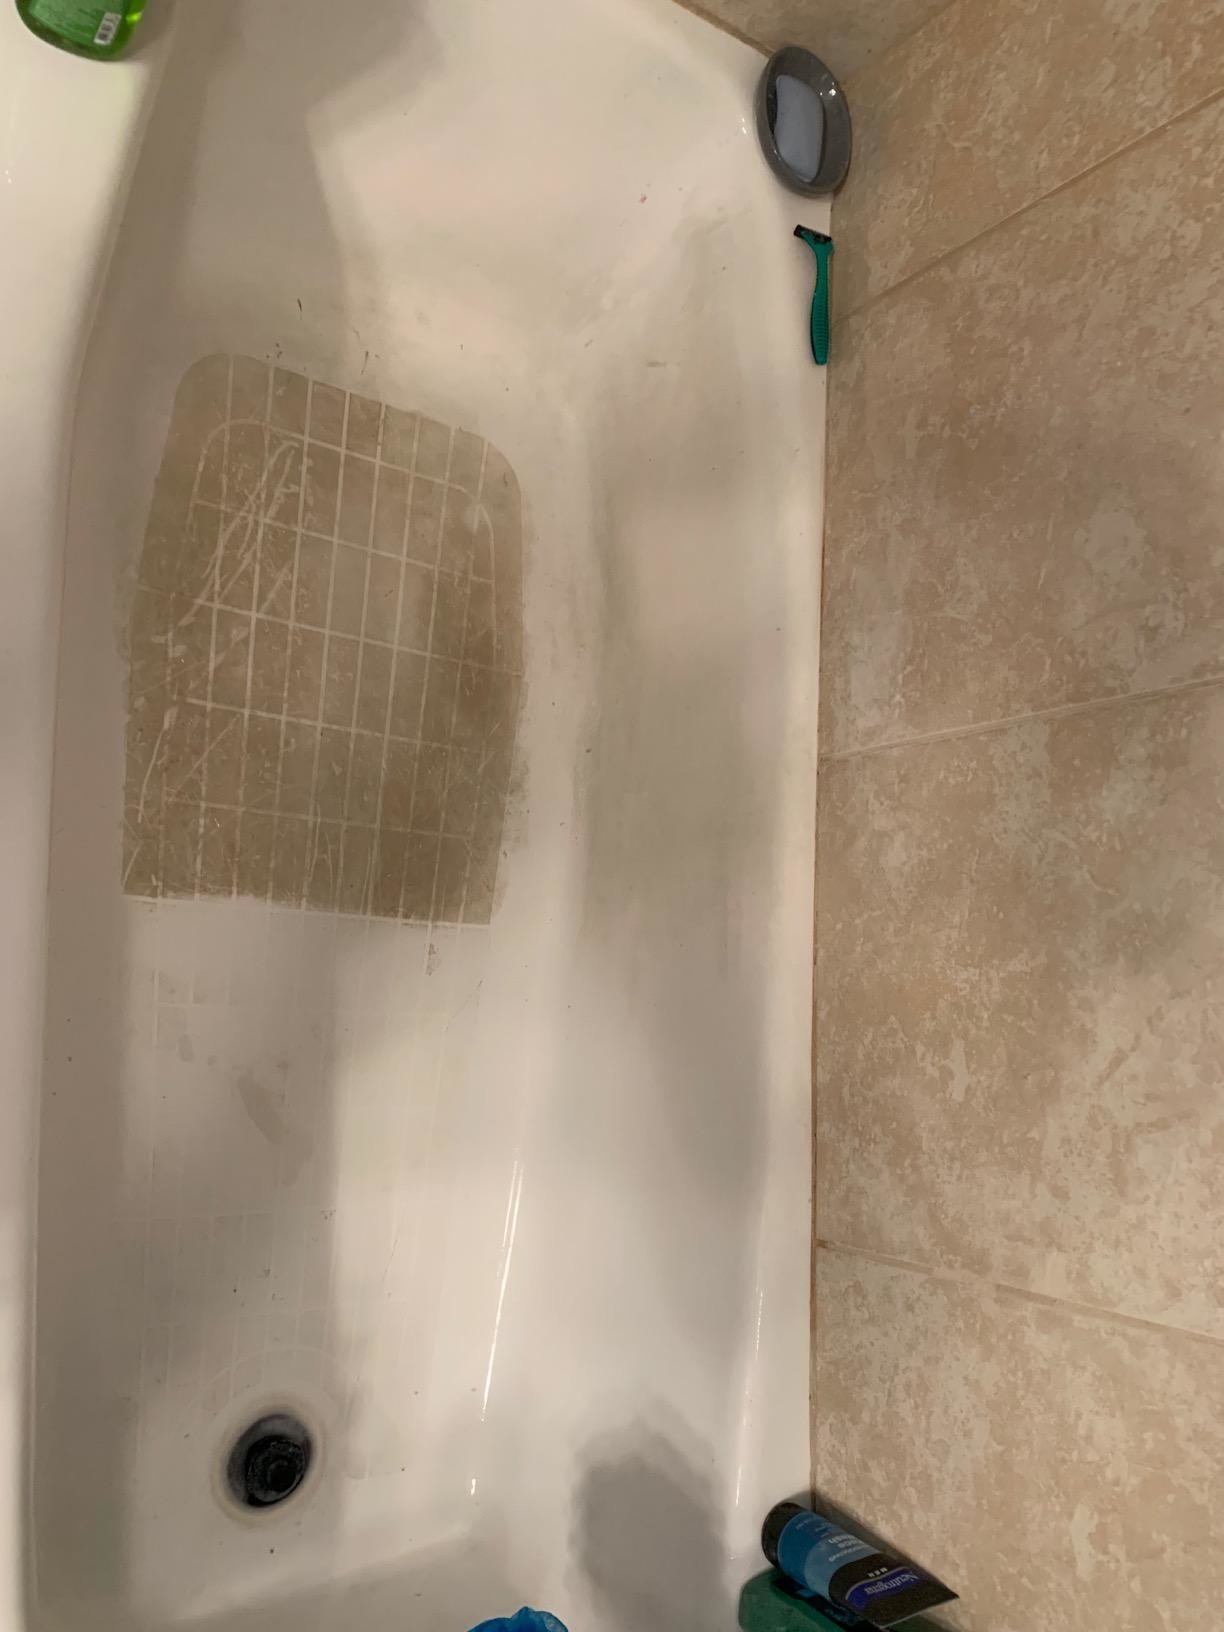 A bathtub half cleaned, half brown with dirt to show the cleaning difference